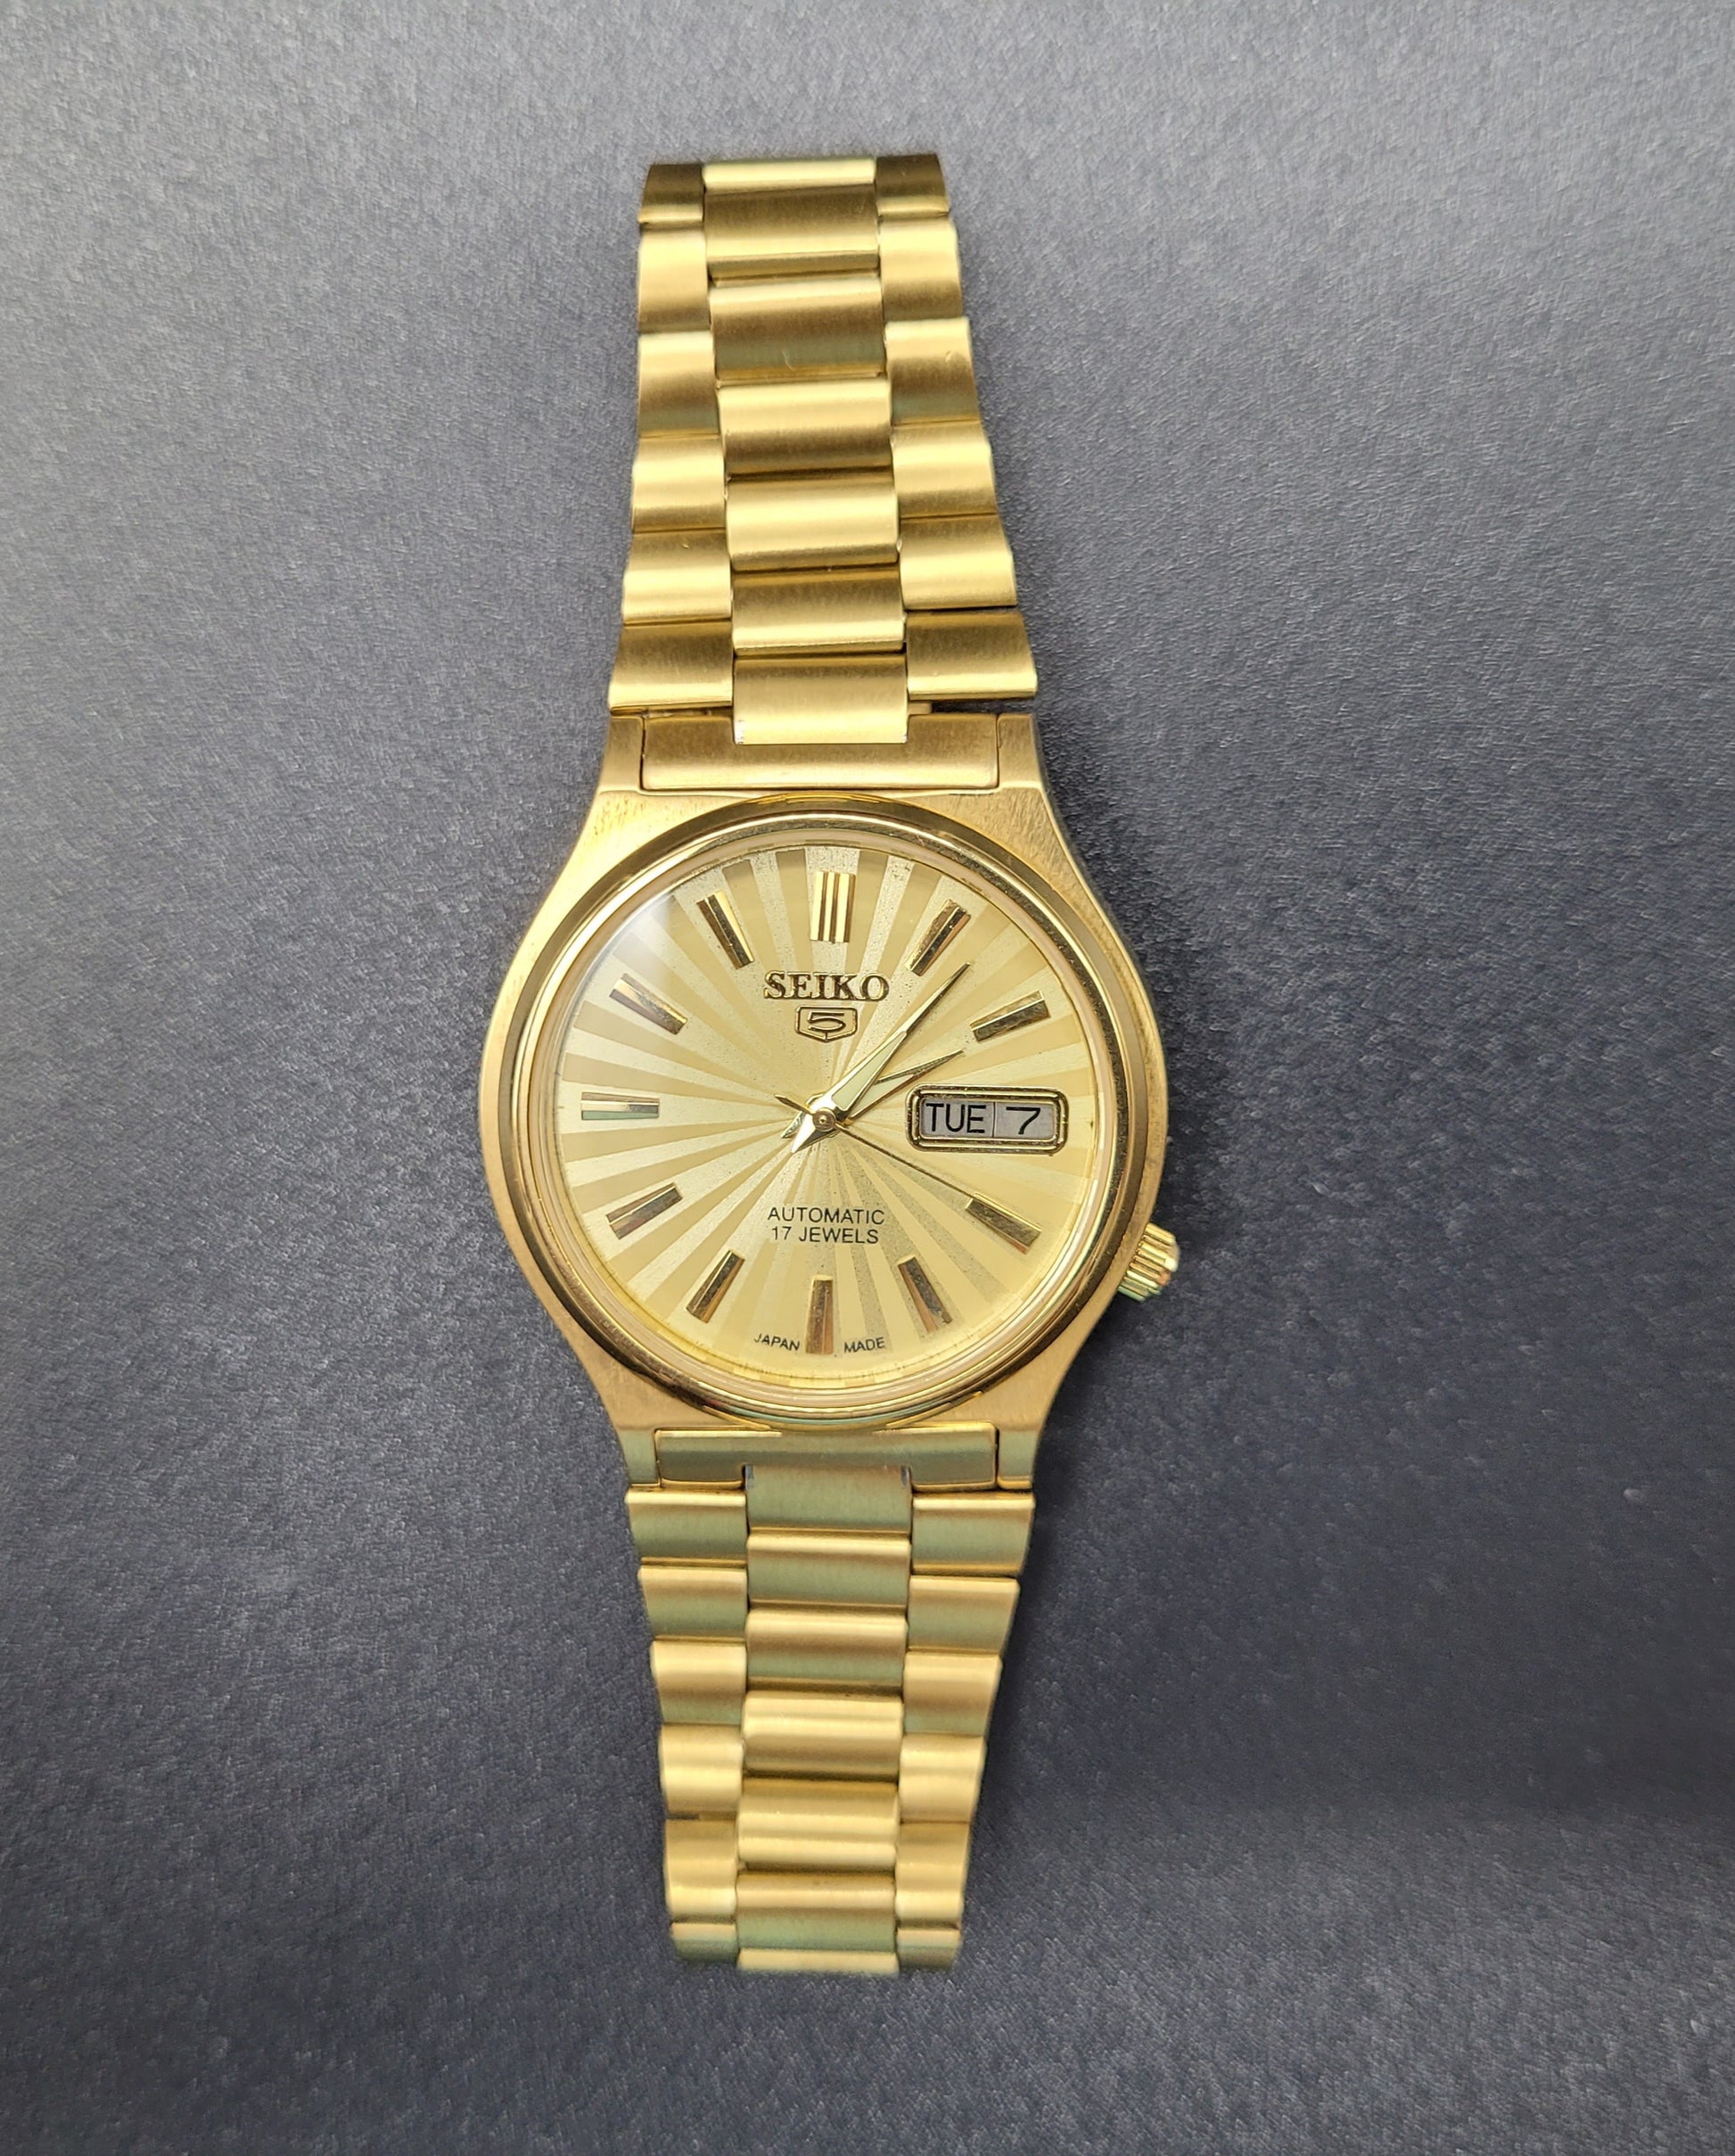 Vintage SEIKO Automatic Watch 17 Jewels Gold Plated